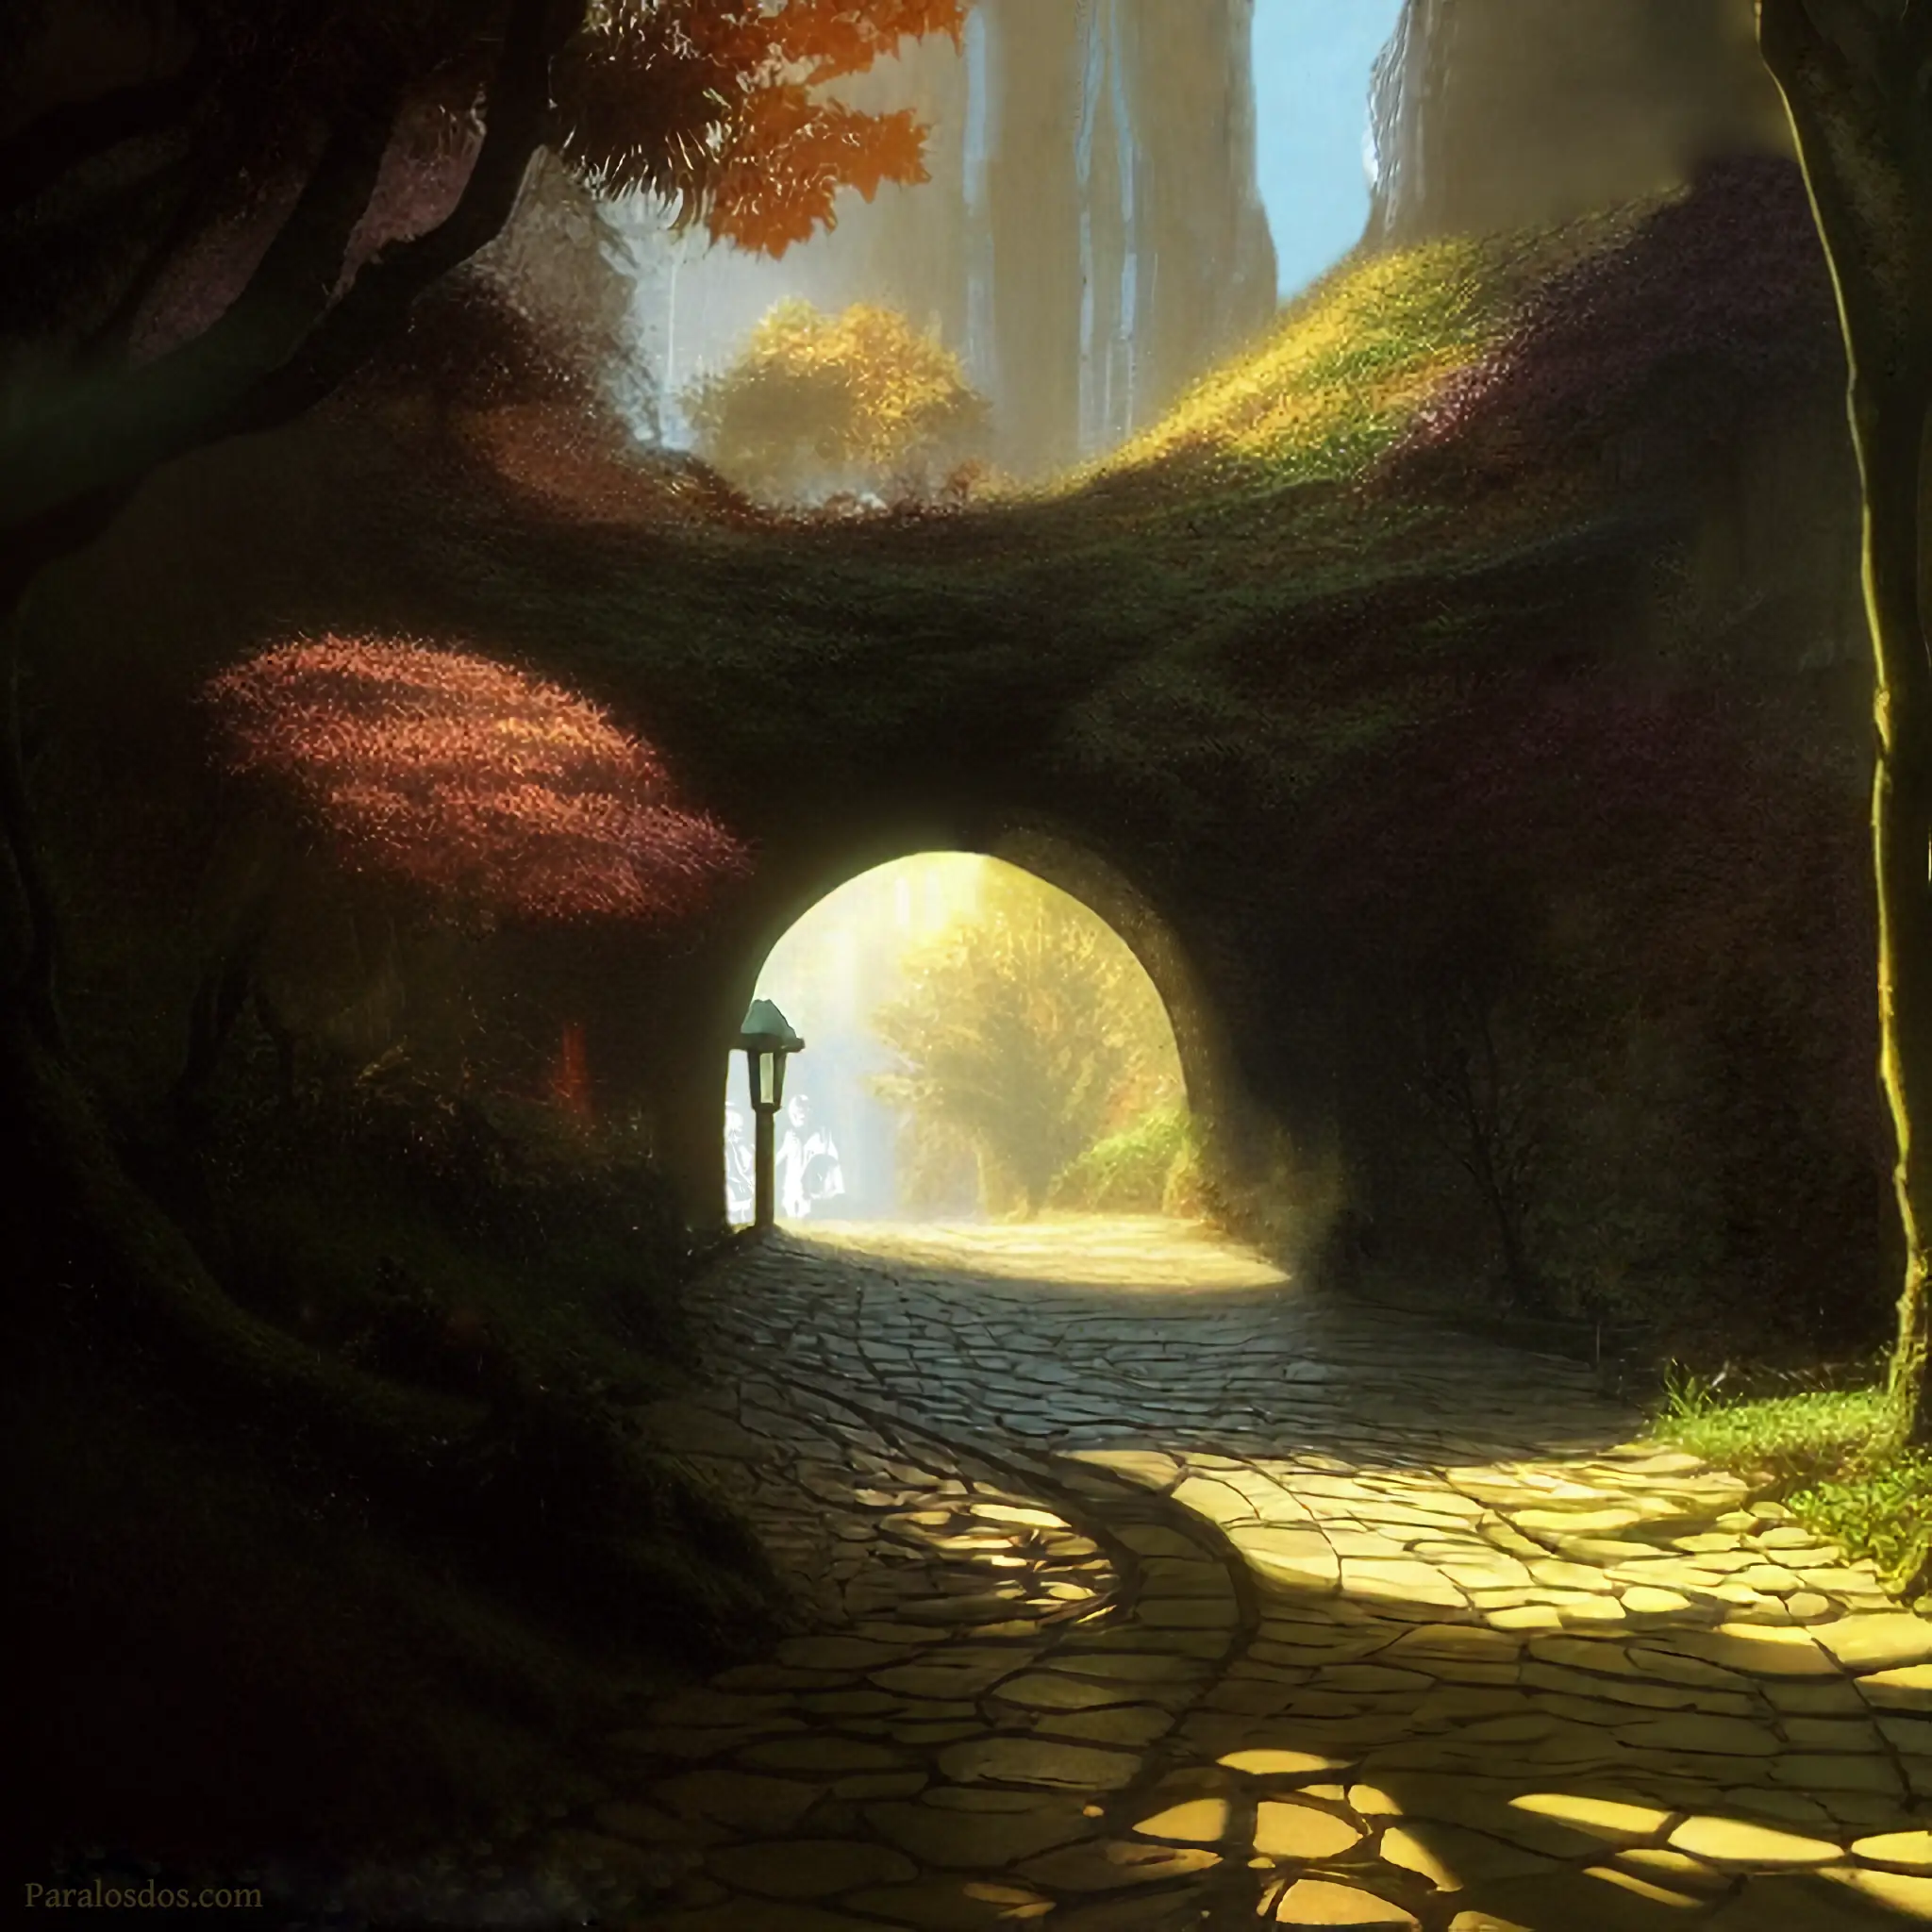 An artistic rendering of a cobblestone path leading through a small overpass which connects parts of a forest.